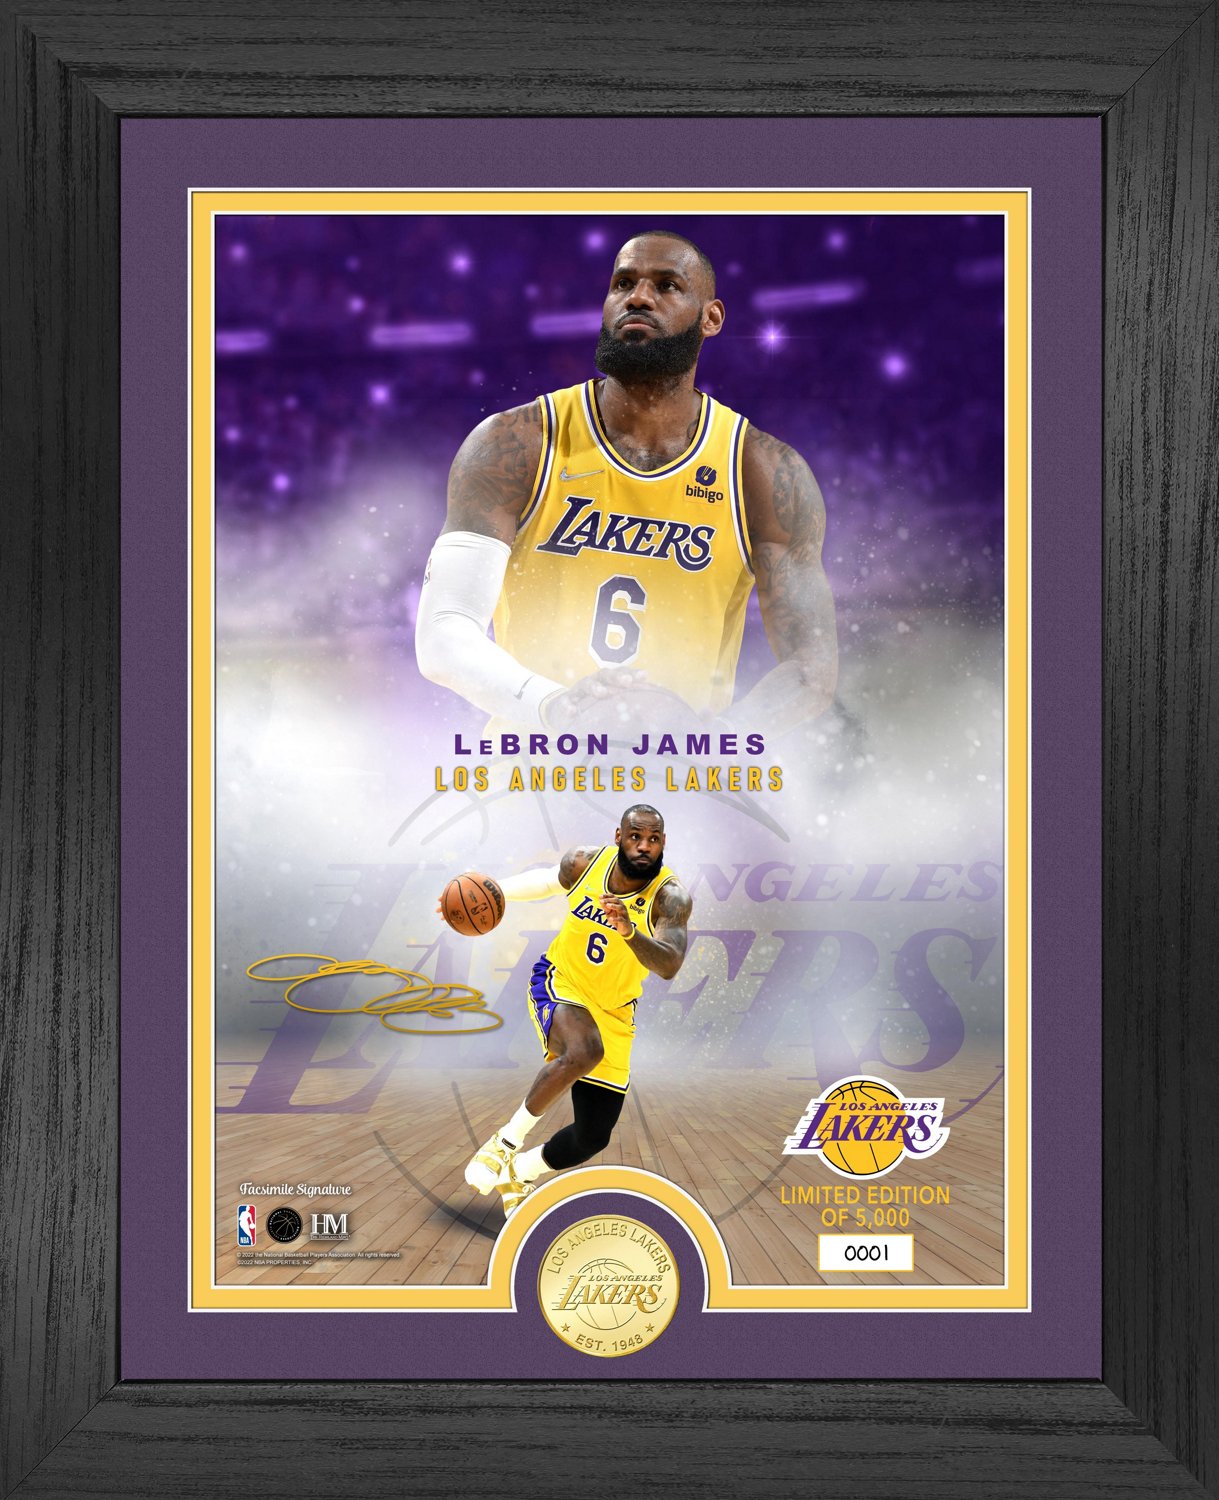 Los Angeles Lakers Gear, Lakers Jerseys, Store, Lakers Pro Shop, Apparel